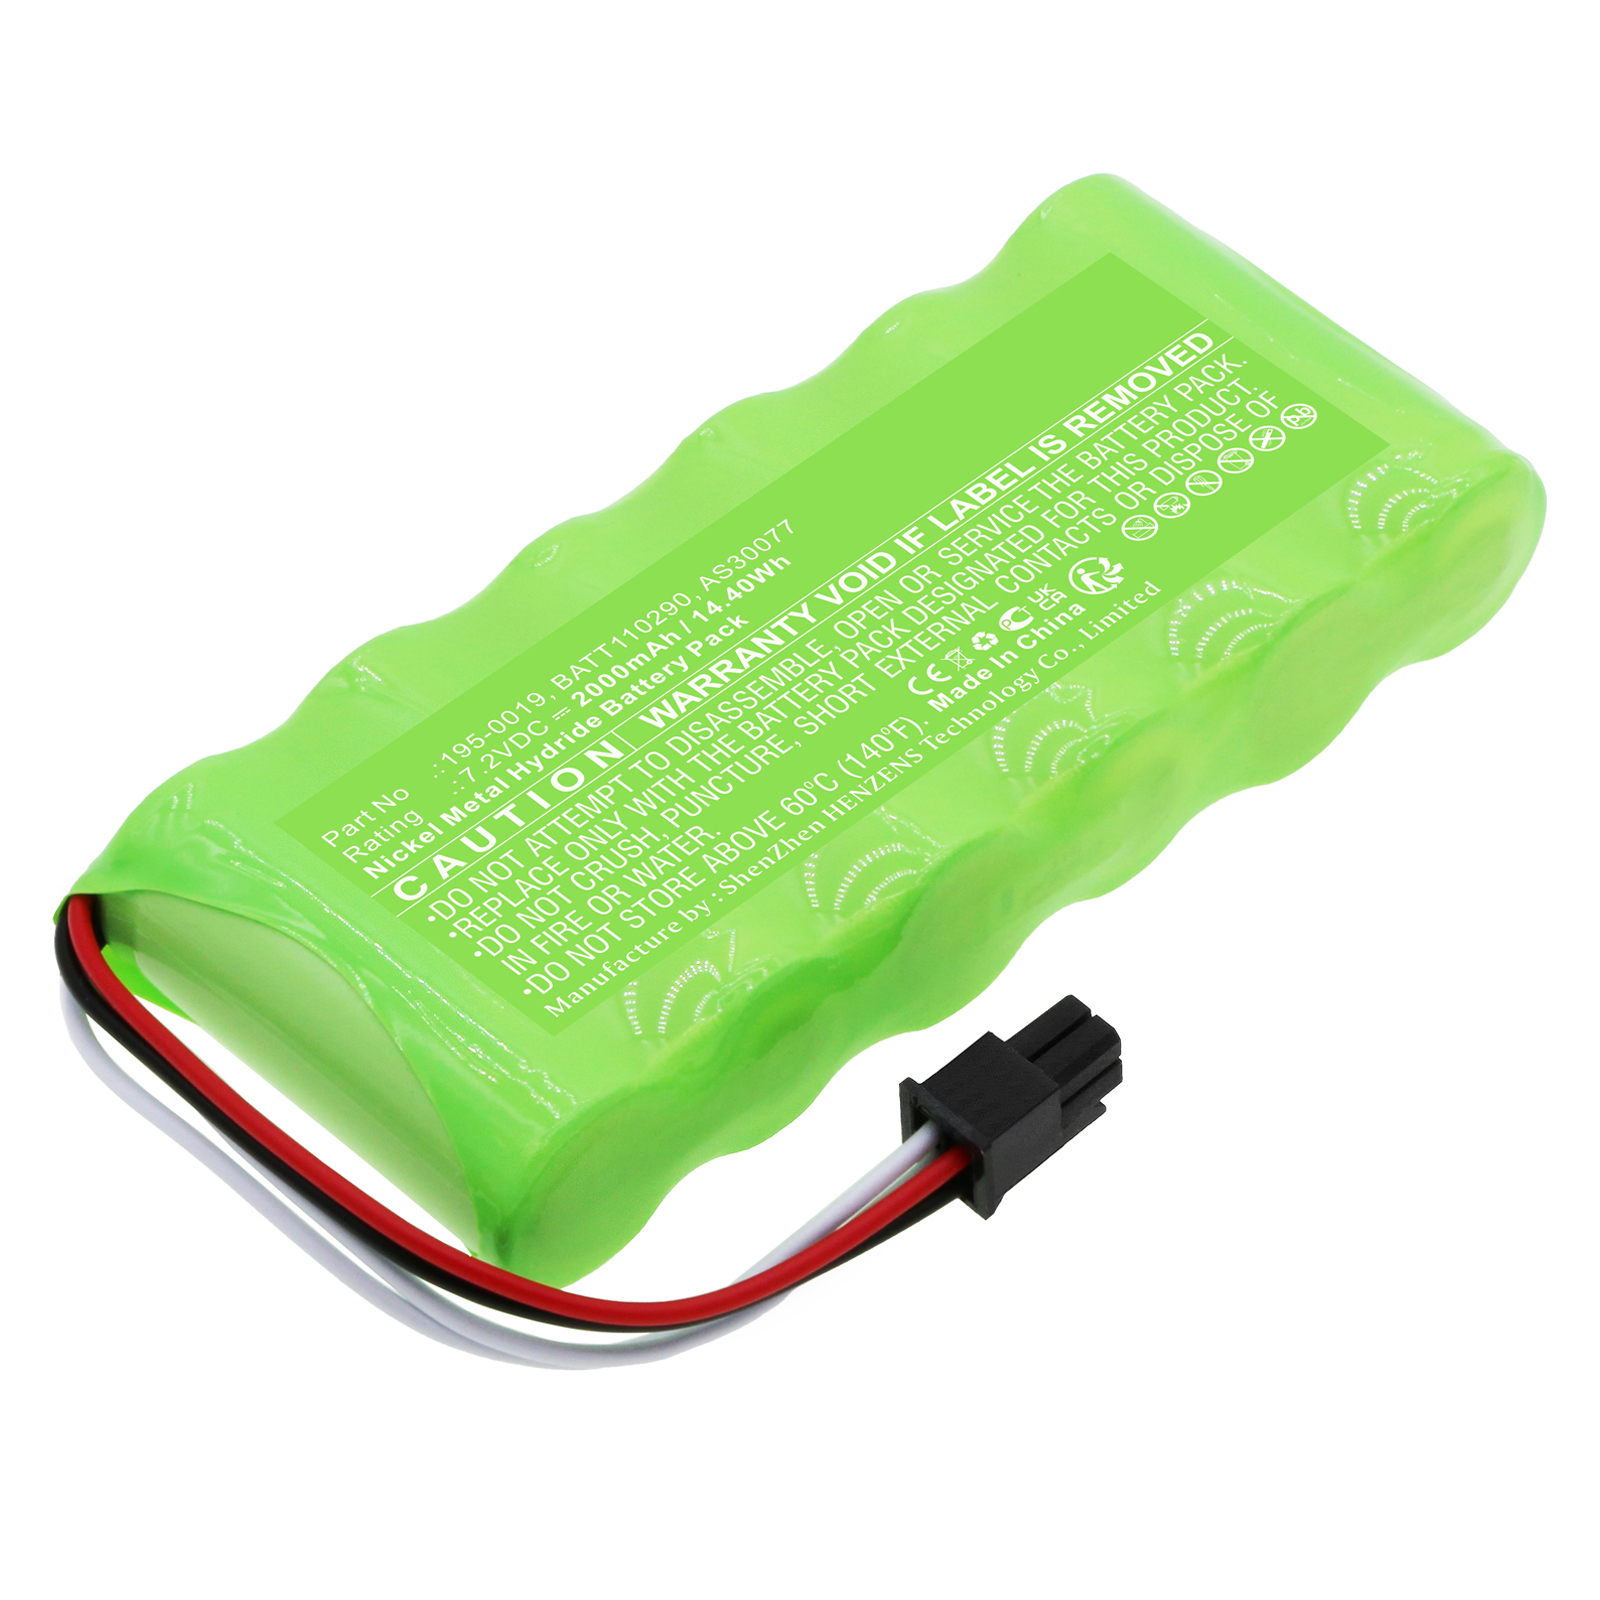 Synergy Digital Medical Battery, Compatible with Aspect Medical System 195-0019 Medical Battery (Ni-MH, 7.2V, 2000mAh)